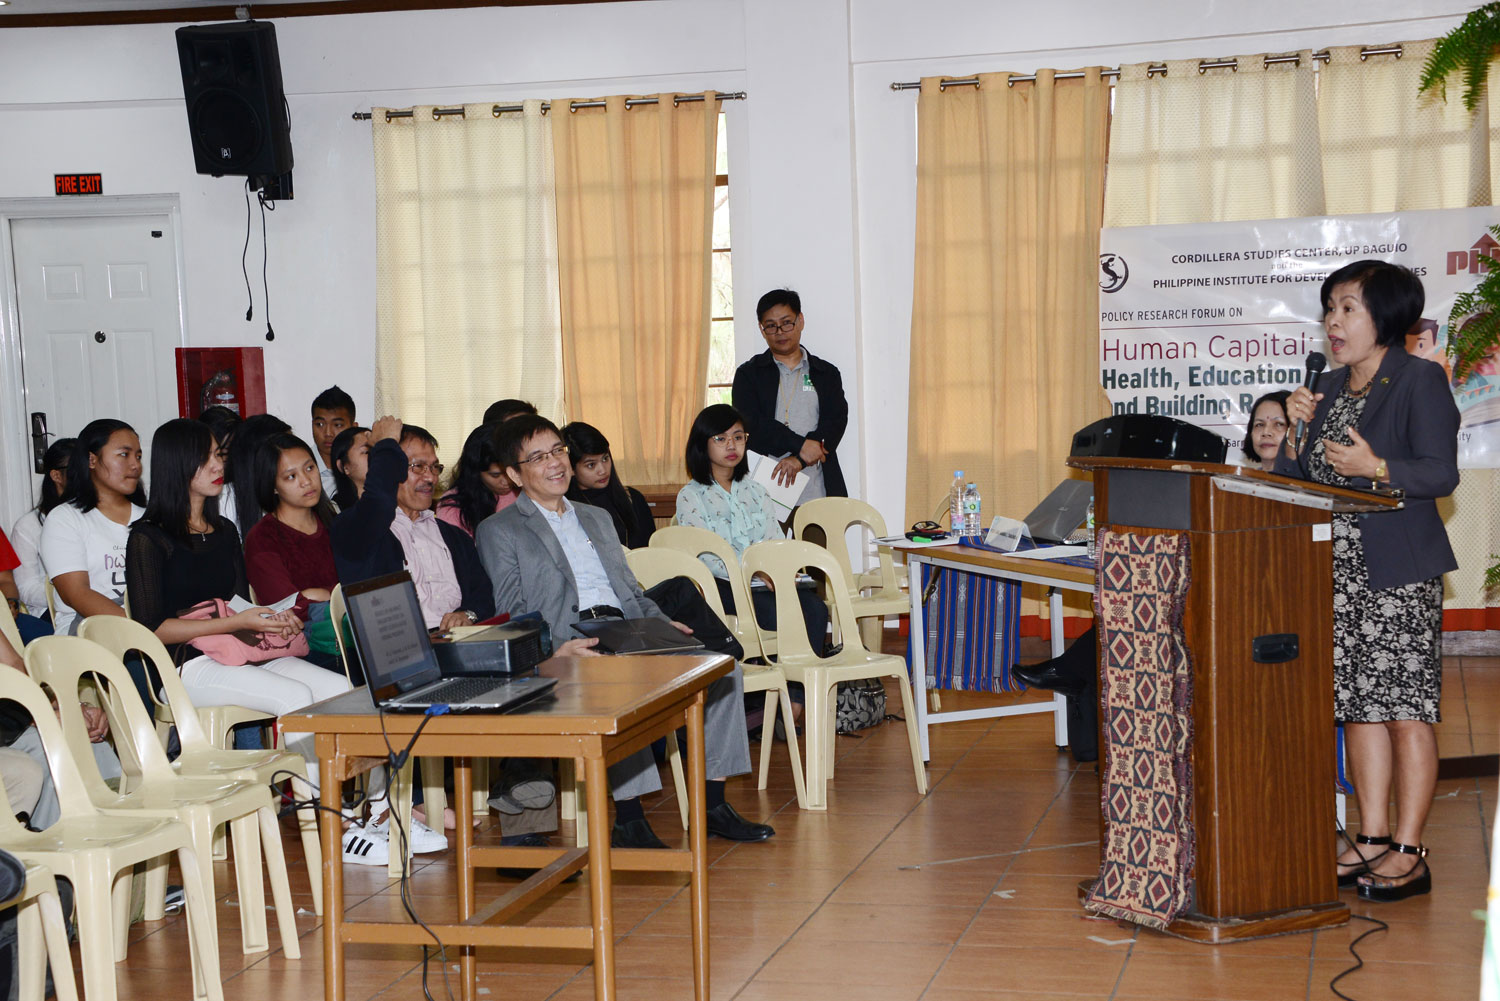 Policy Research Forum on Human Capital: Health, Education, and Building Resilience-DSC_6085.jpg